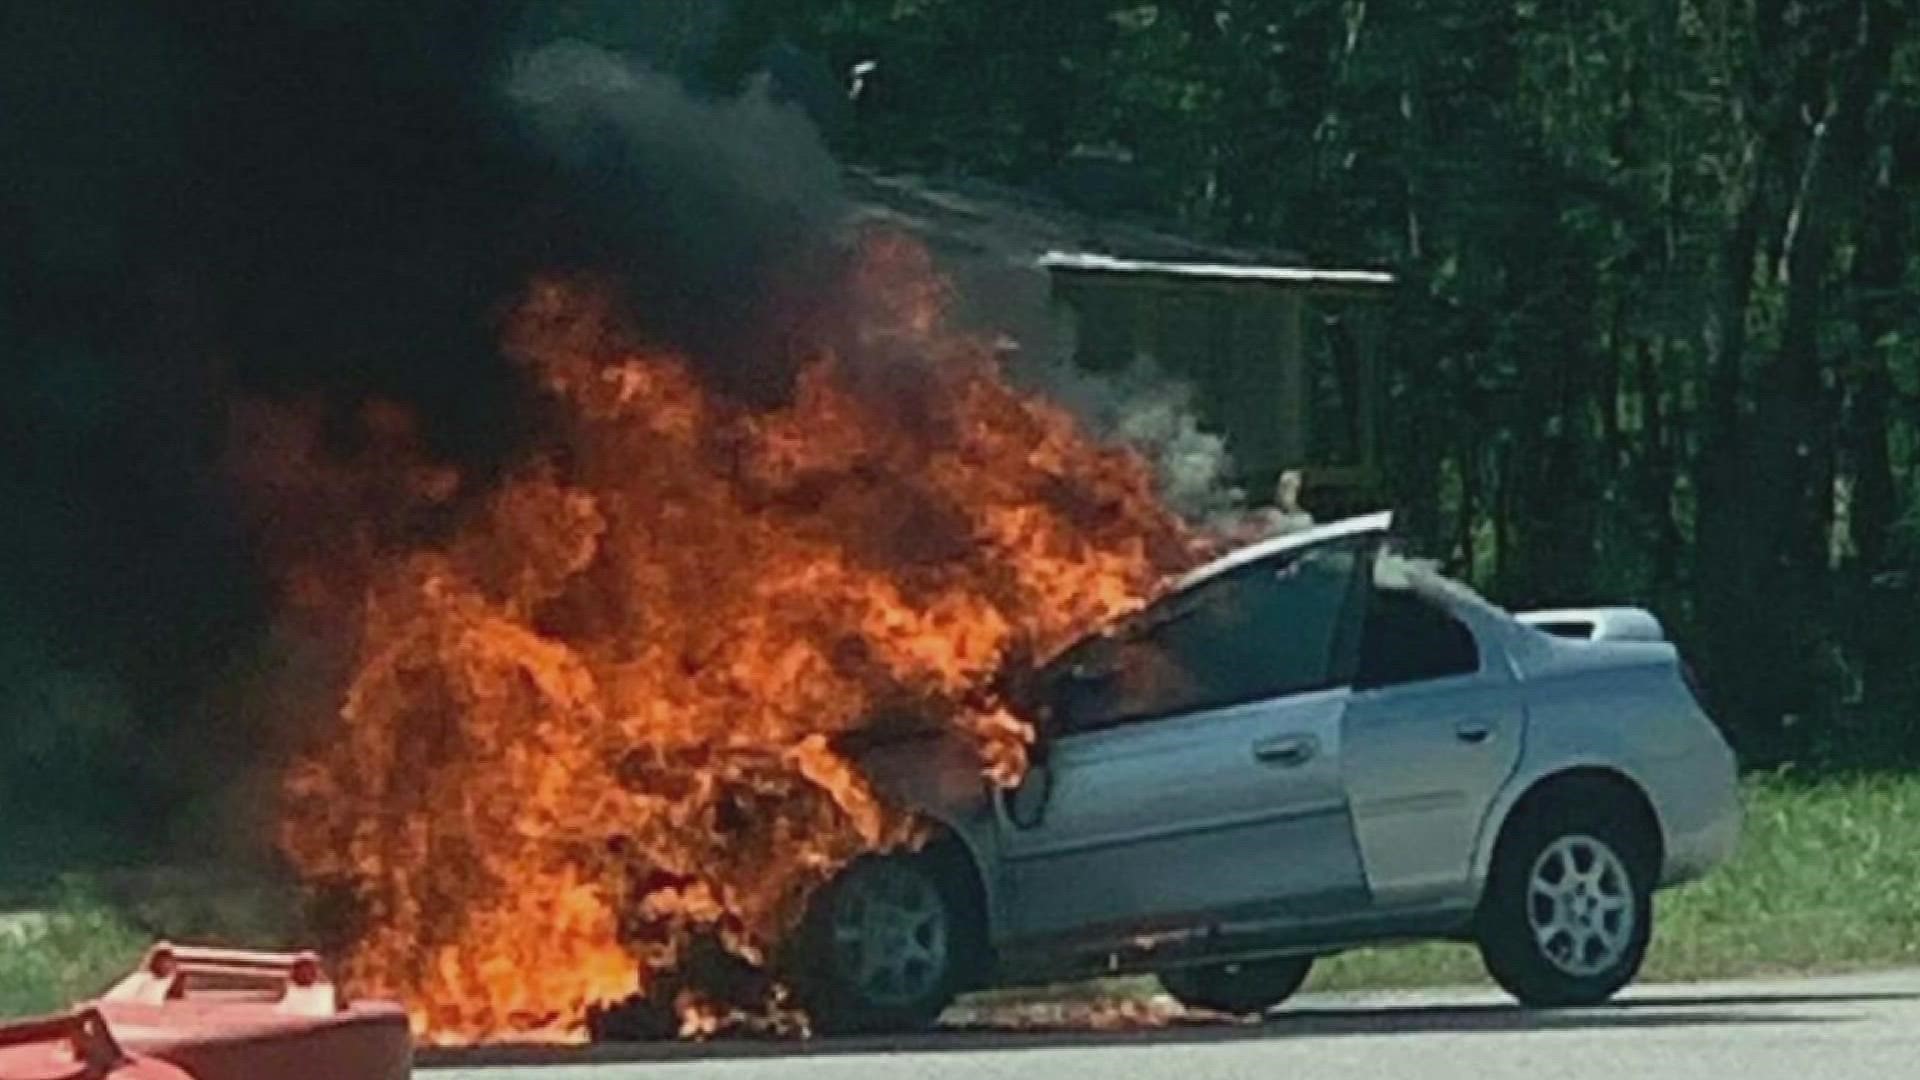 Last week a Jefferson County woman saved a young man from being burned alive when his car caught fire as he was driving along Interstate 10.